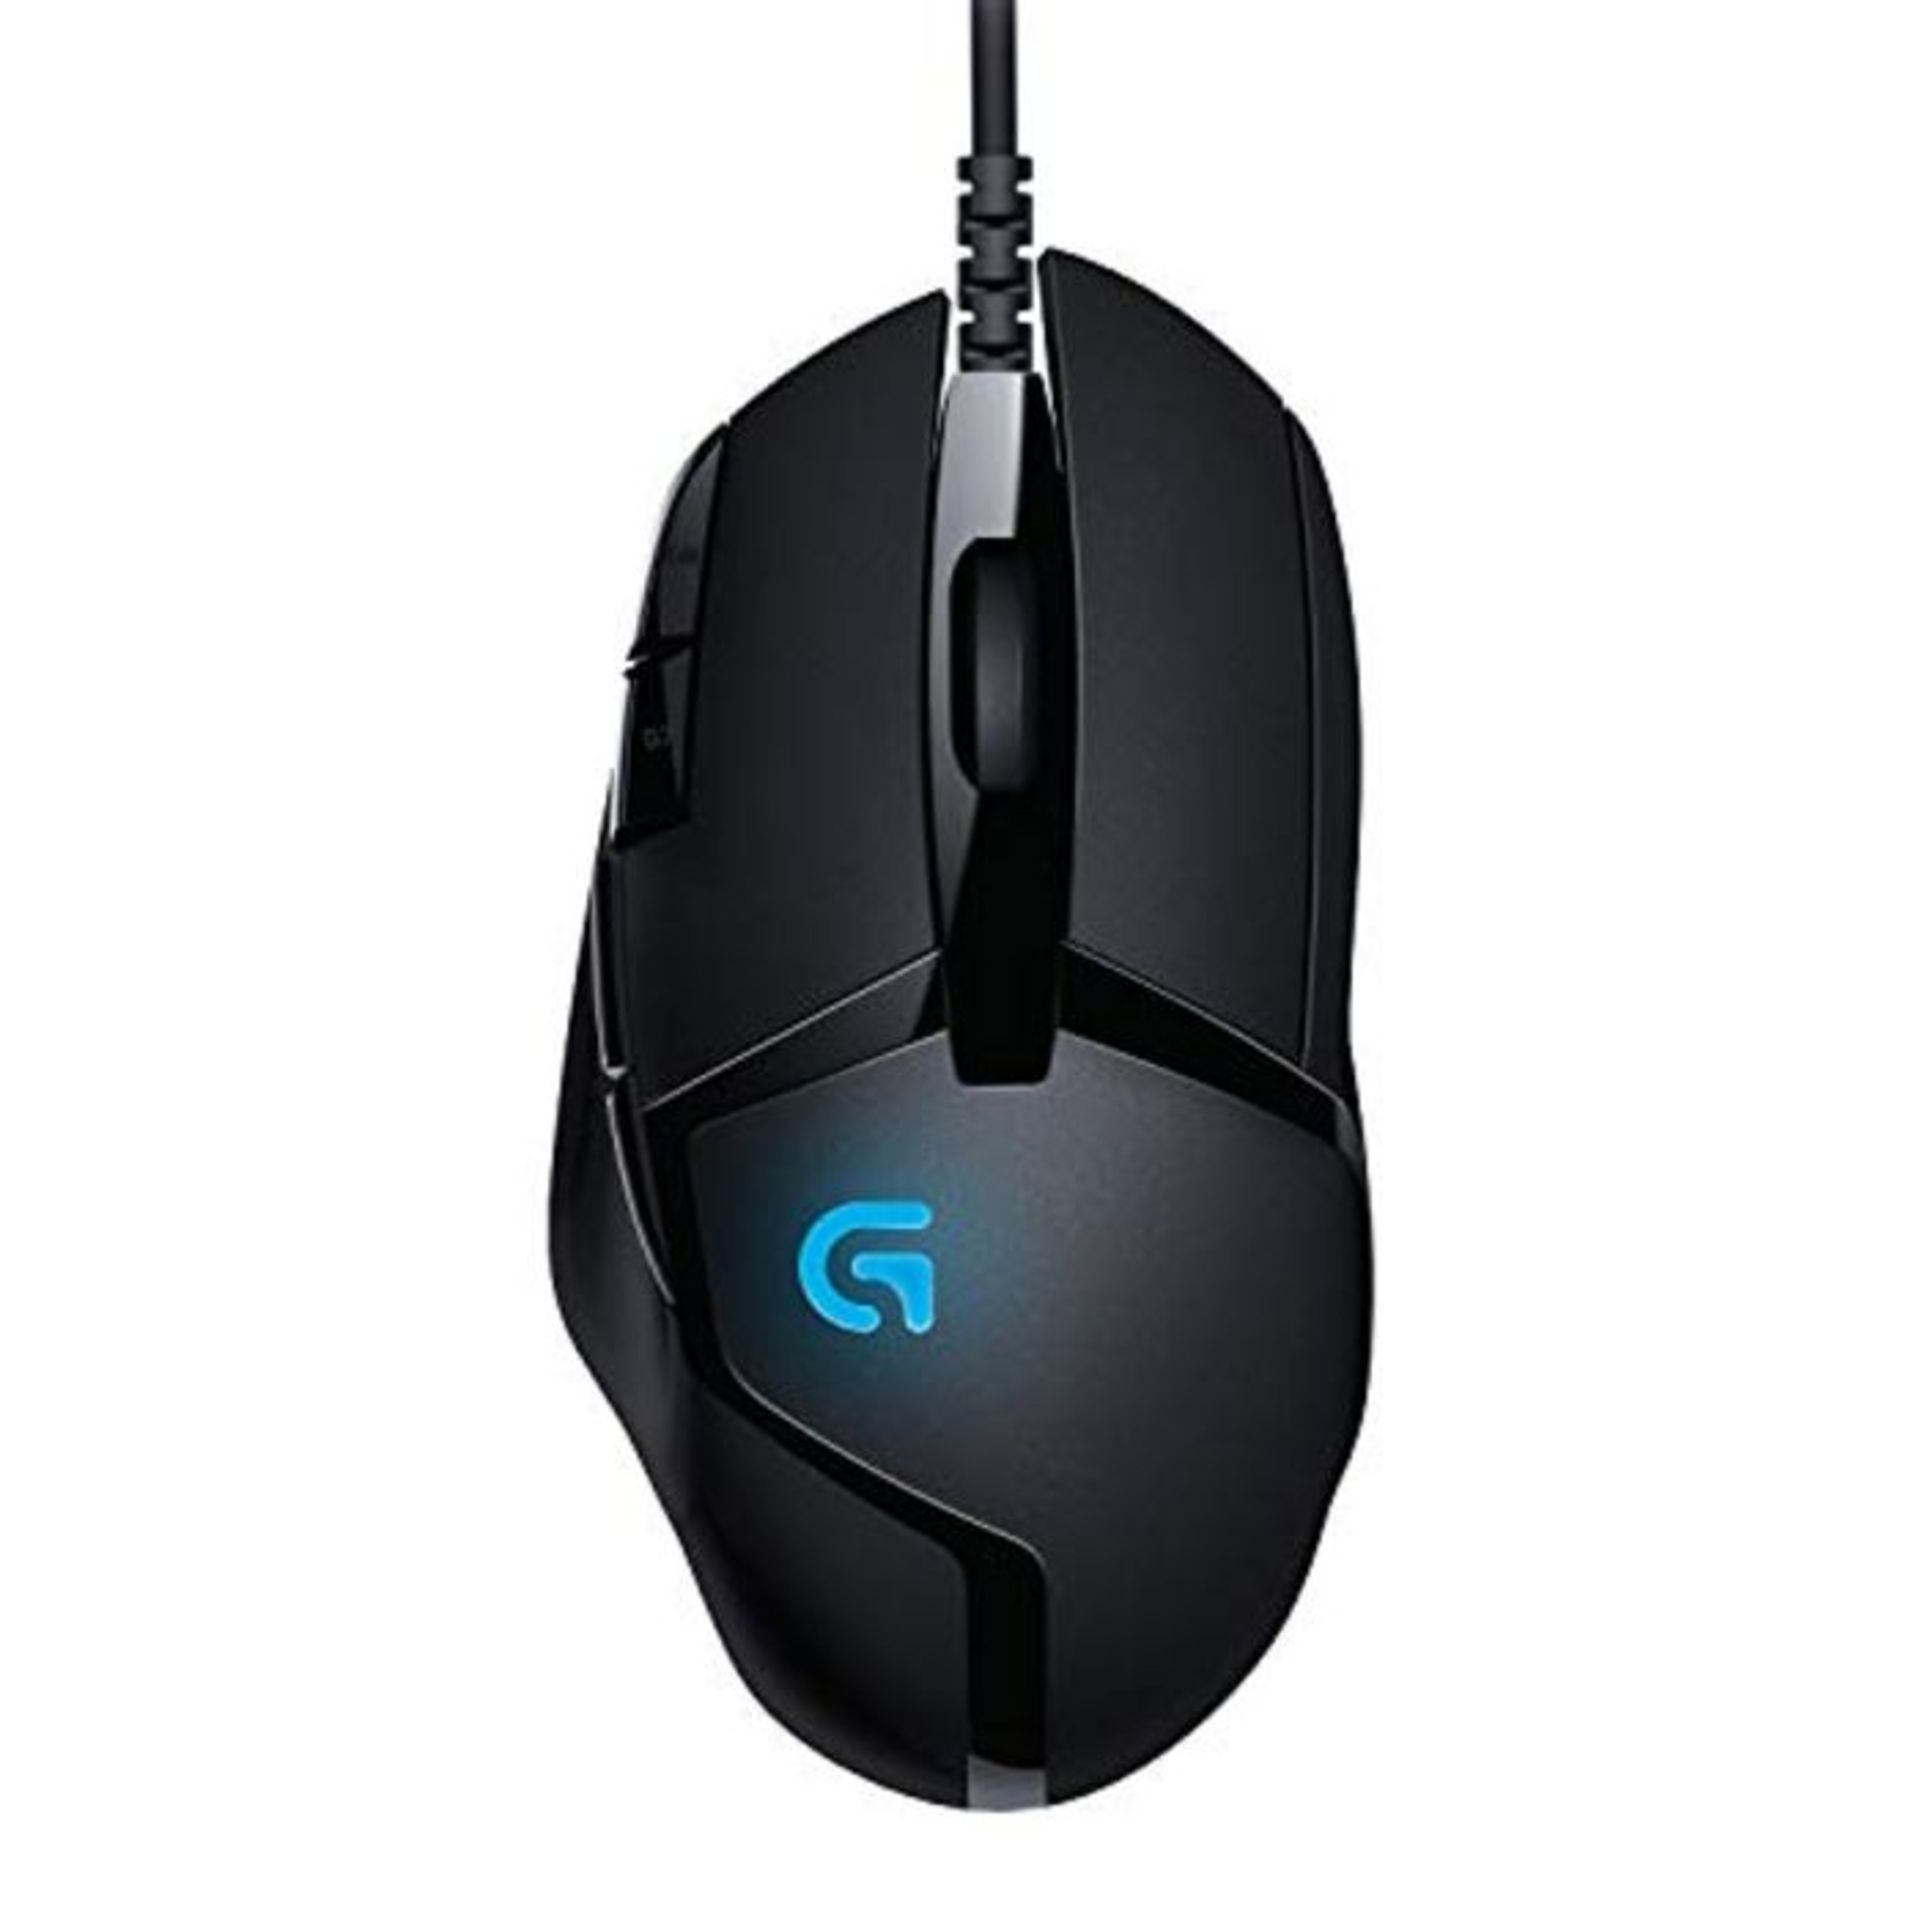 Logitech G402 Hyperion Fury Wired Gaming Mouse, 4,000 DPI, Lightweight, 8 Programmable